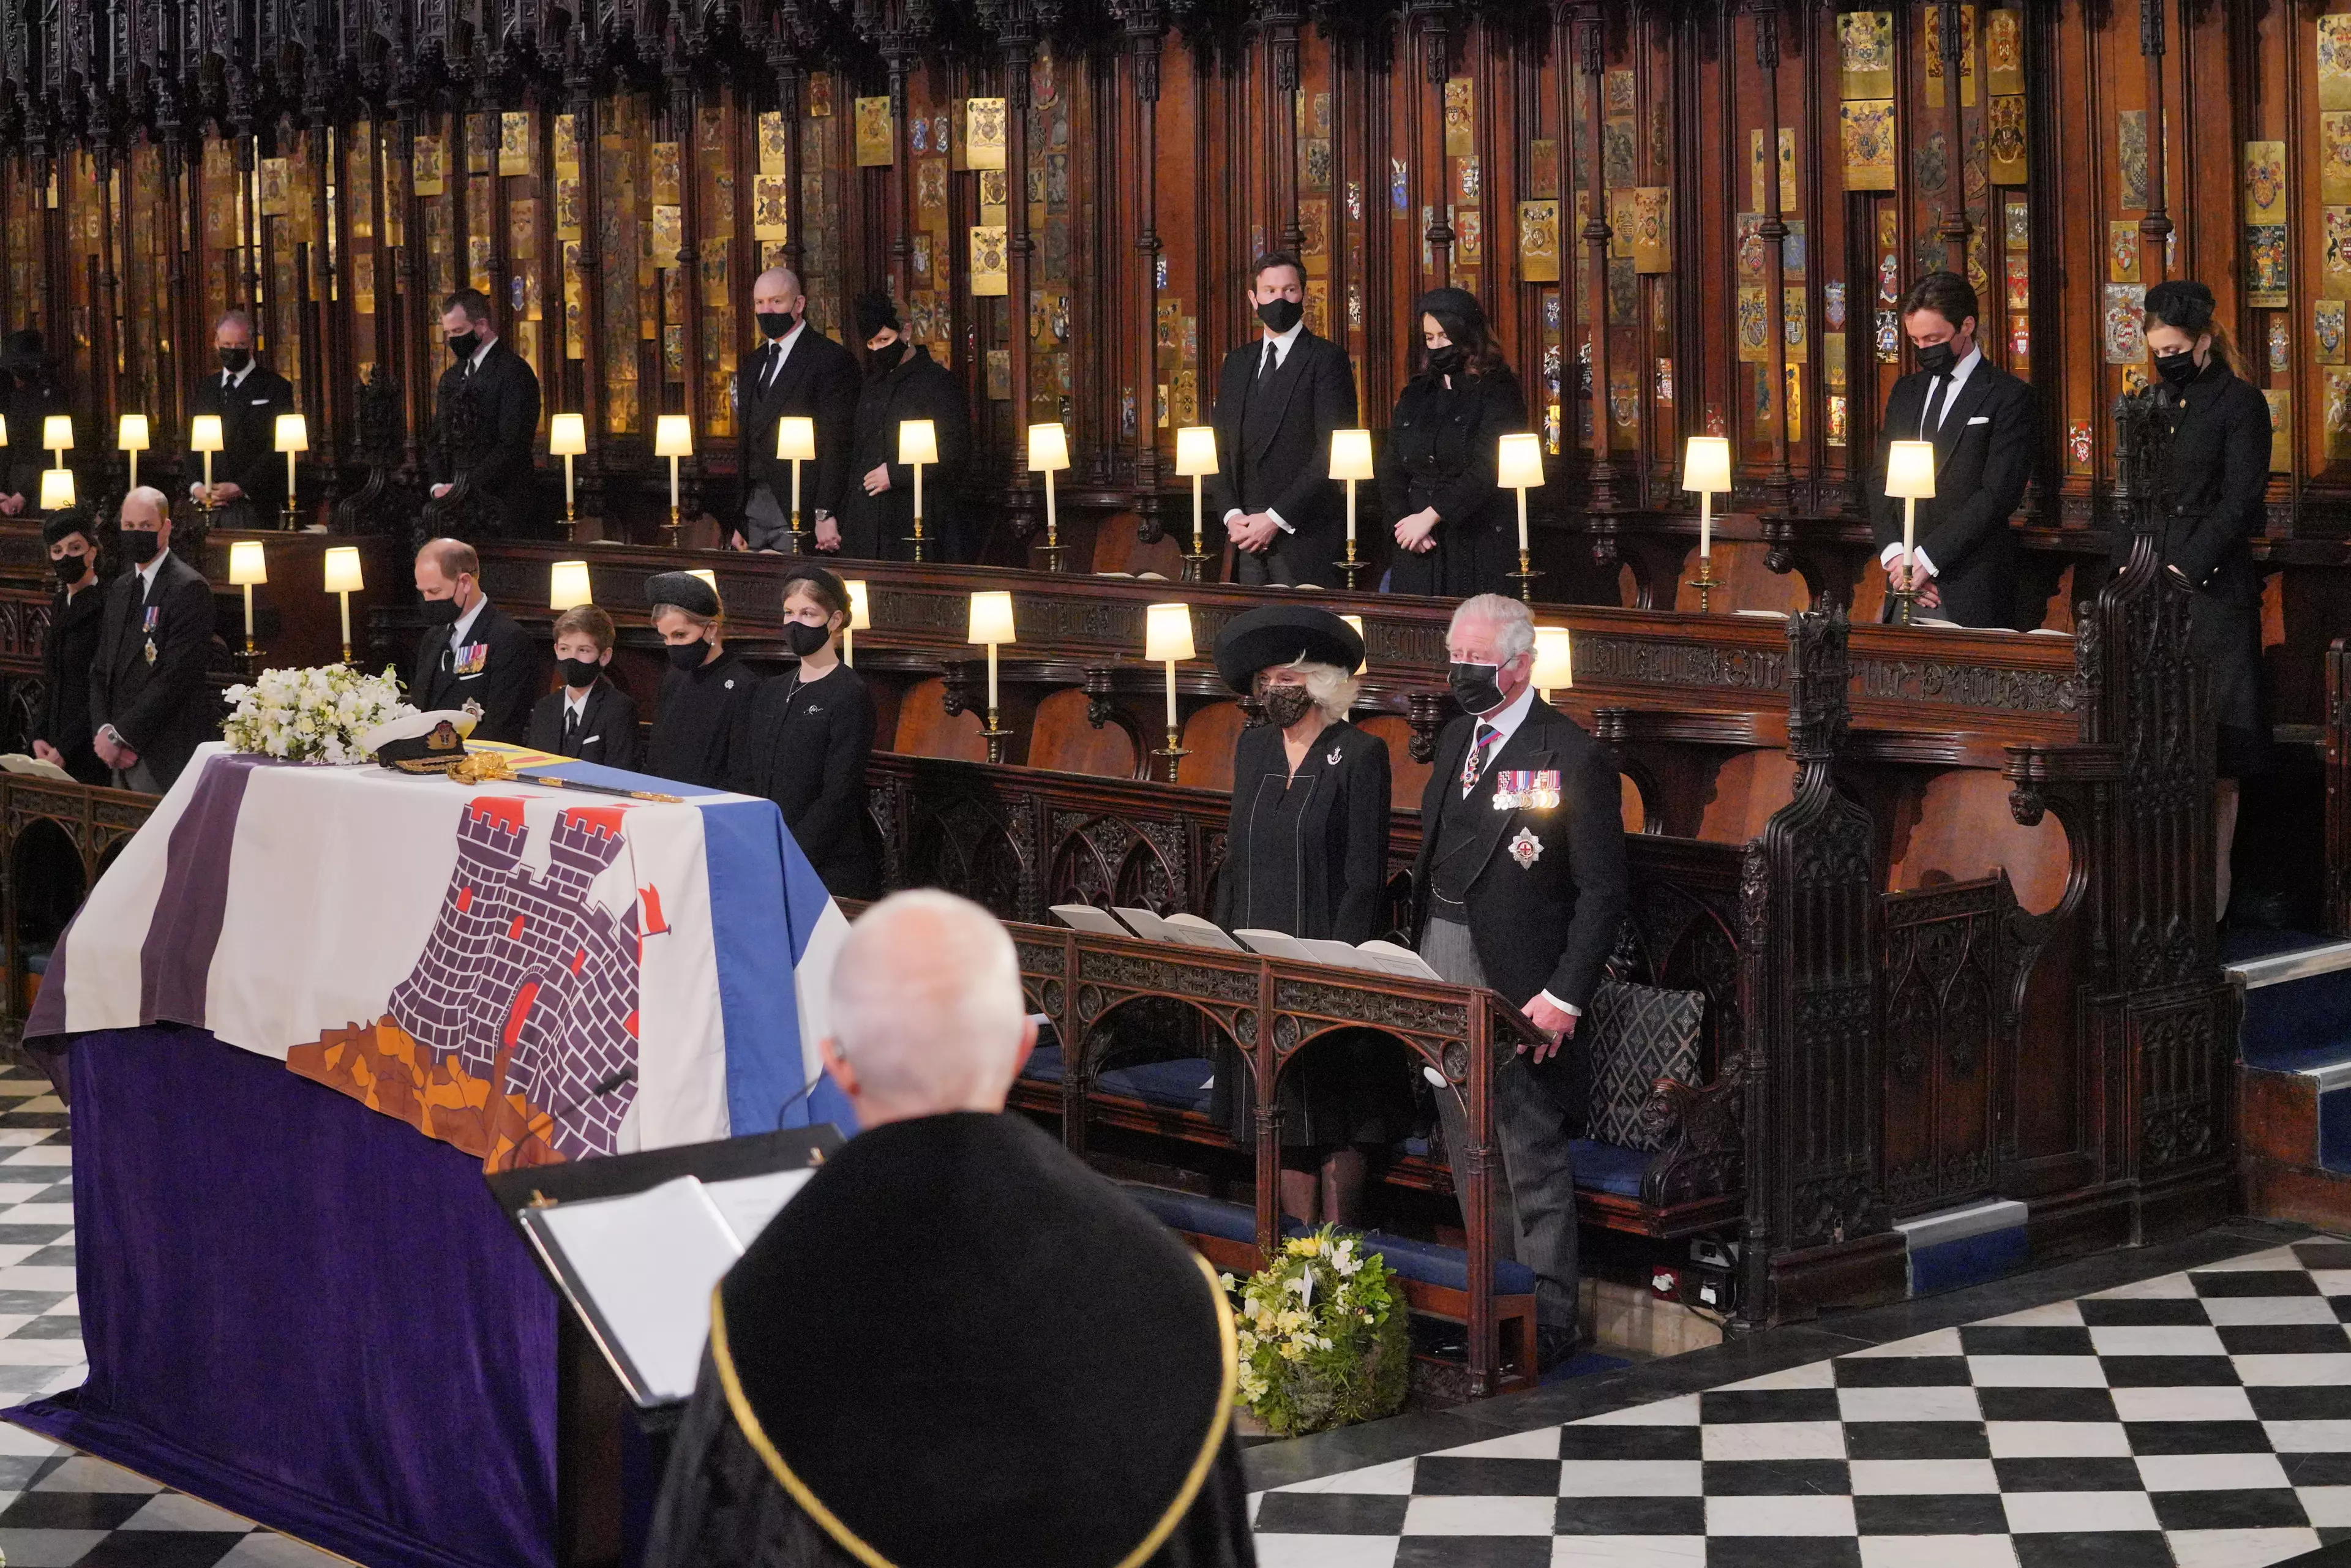 Prince Philip was laid to rest at St George's Chapel, Windsor.